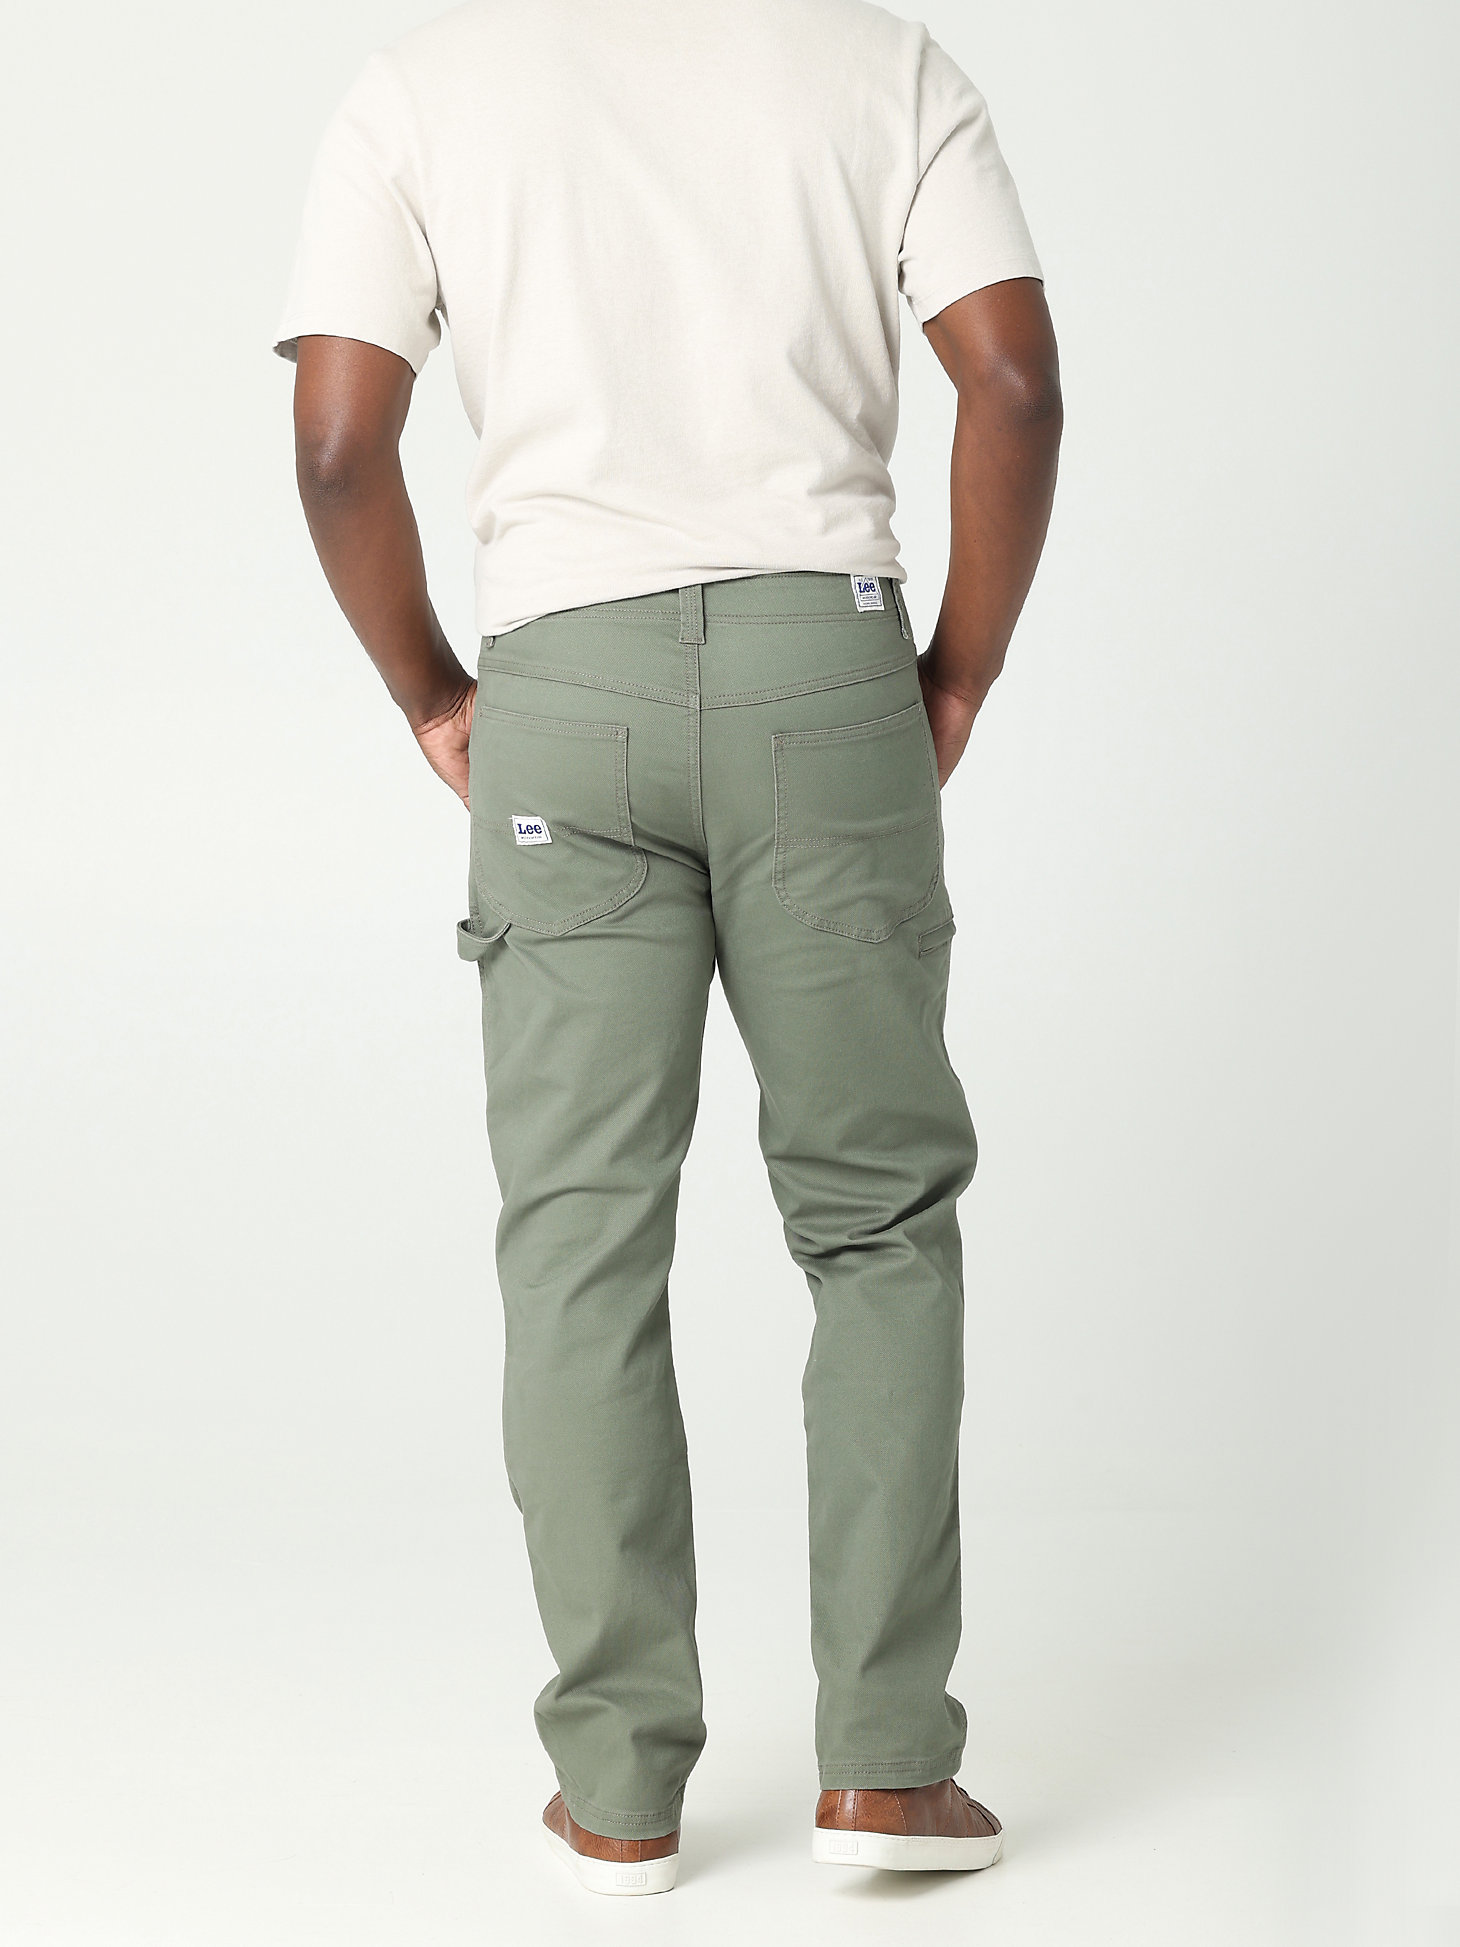 Men's Workwear Relaxed Fit Cargo Pant in Muted Olive alternative view 1